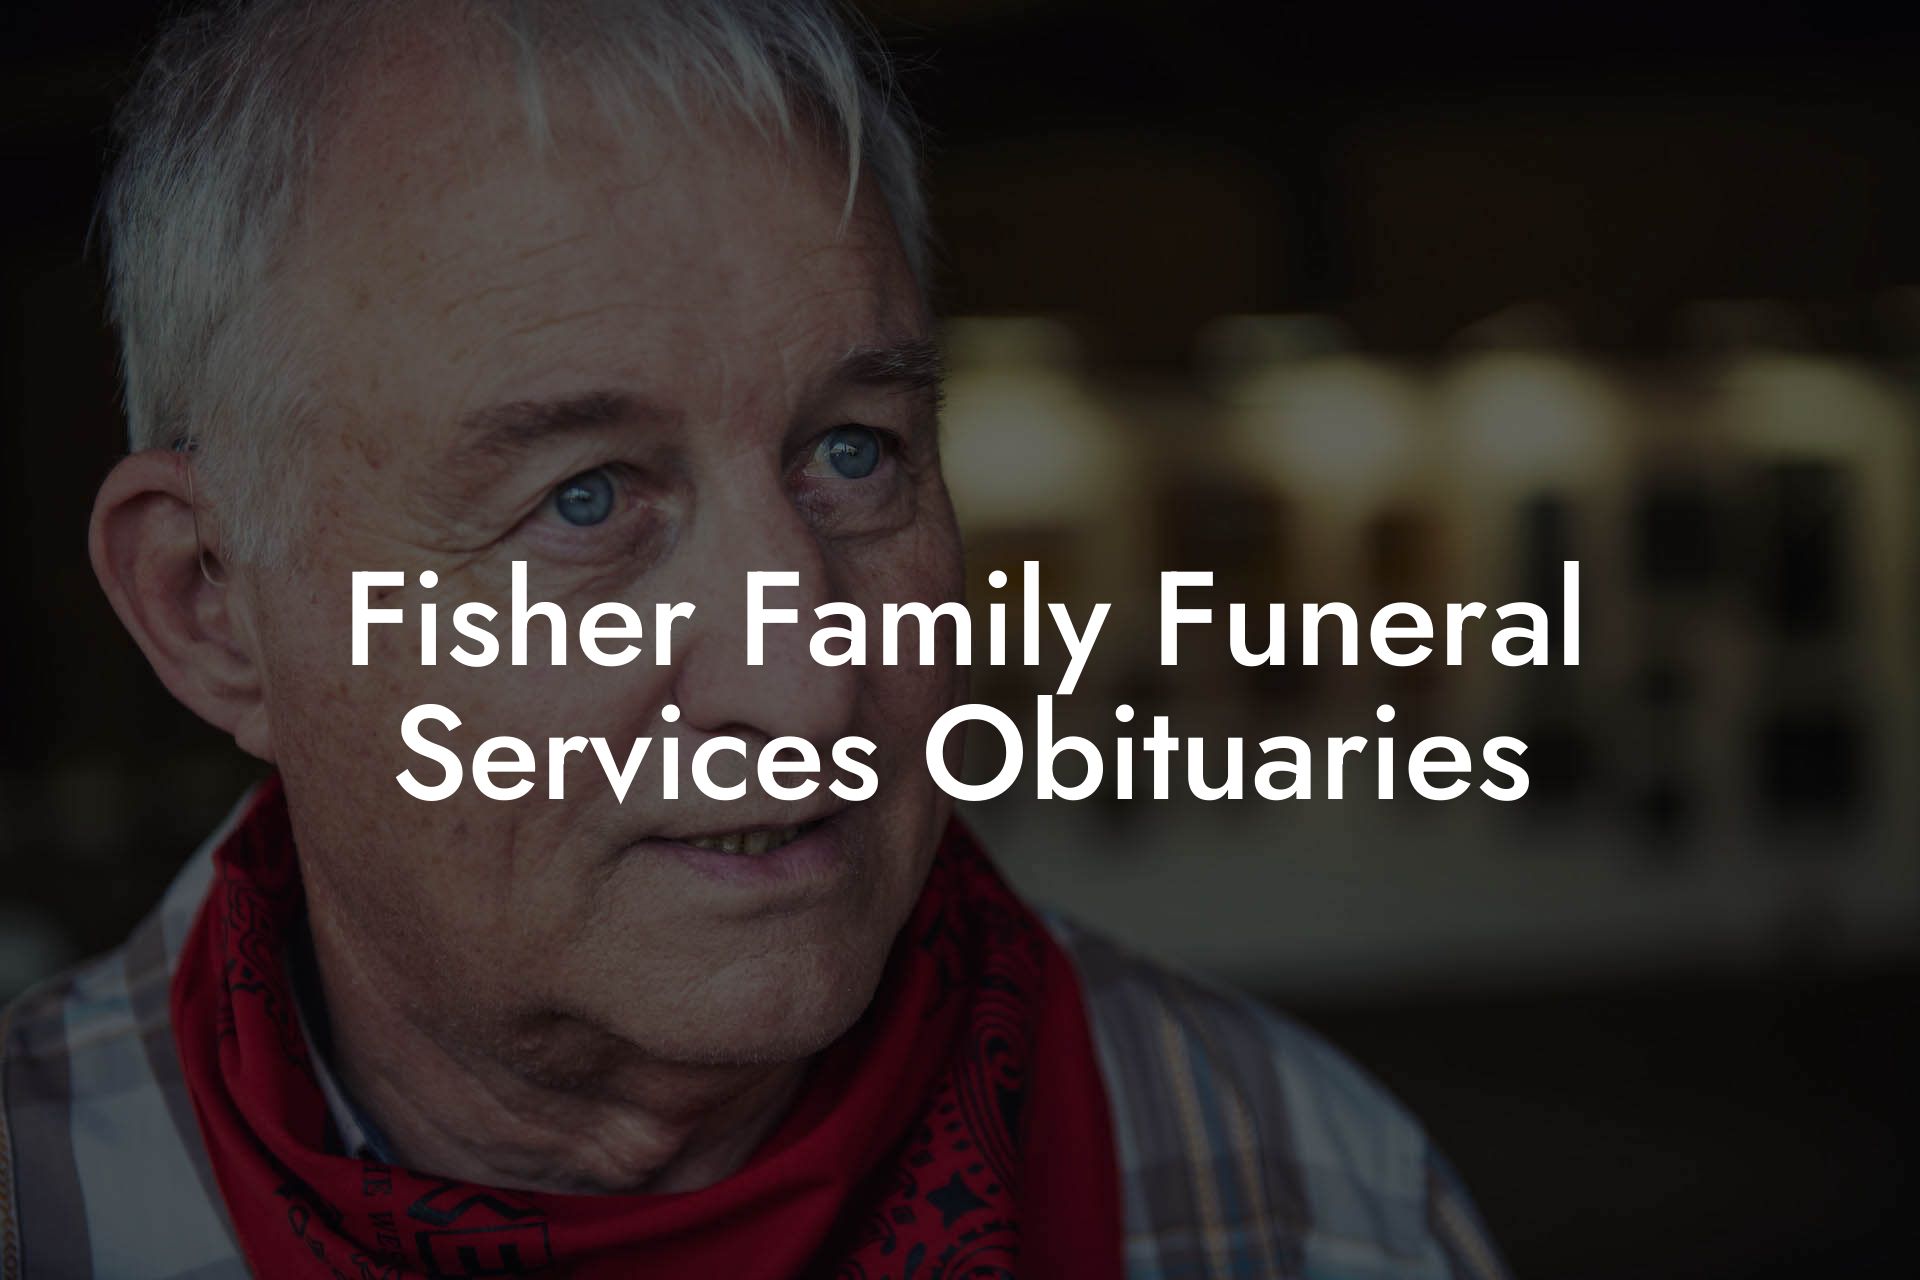 Fisher Family Funeral Services Obituaries